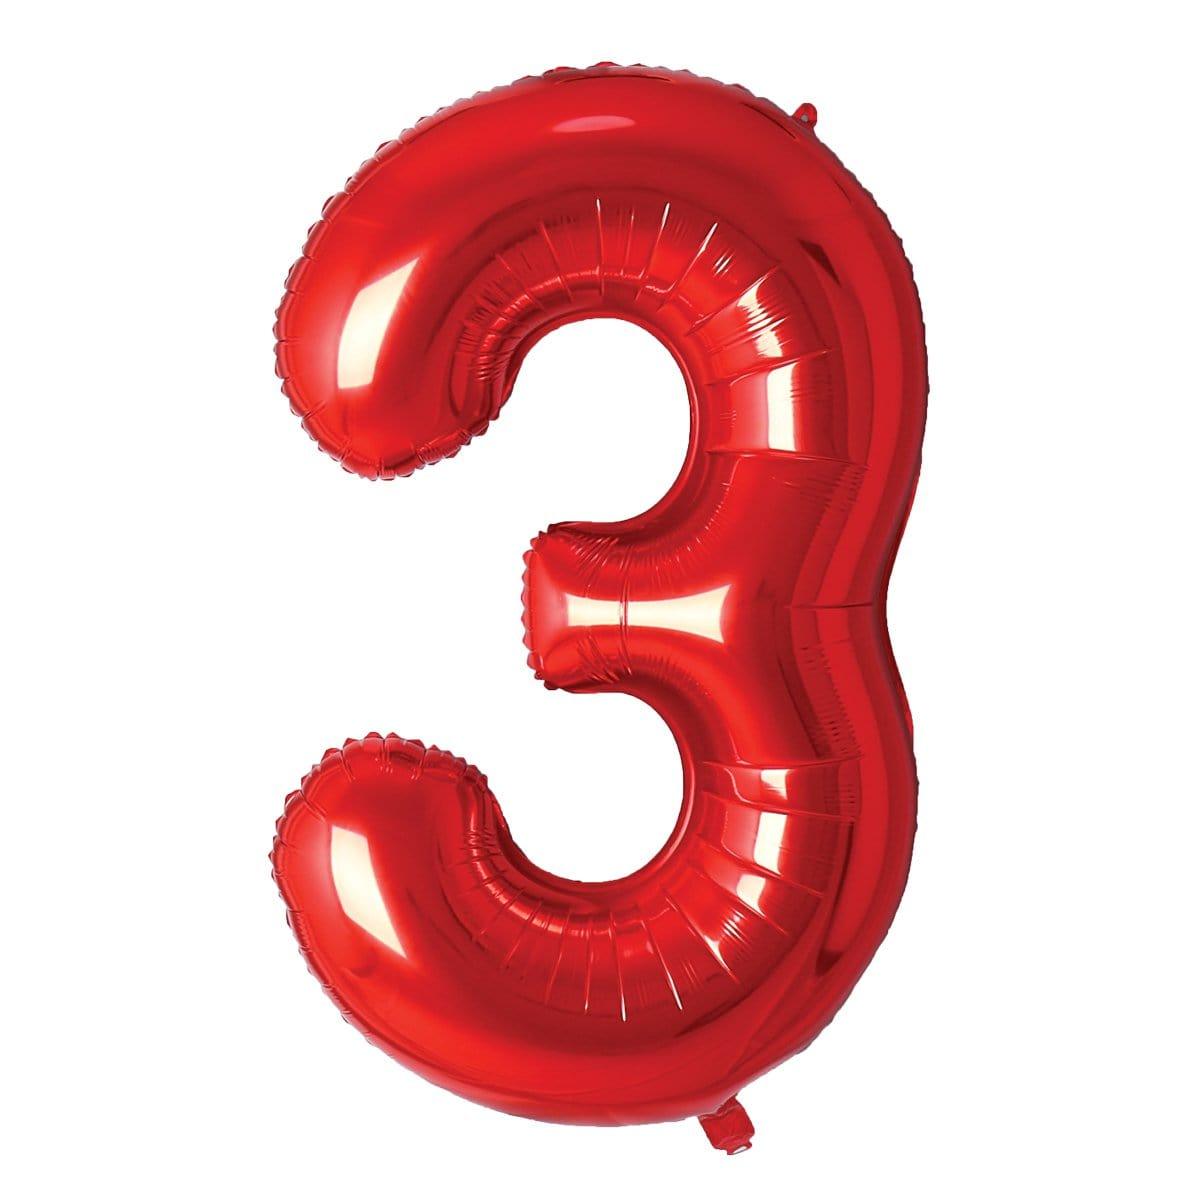 Buy Balloons Red Number 3 Foil Balloon, 34 Inches sold at Party Expert